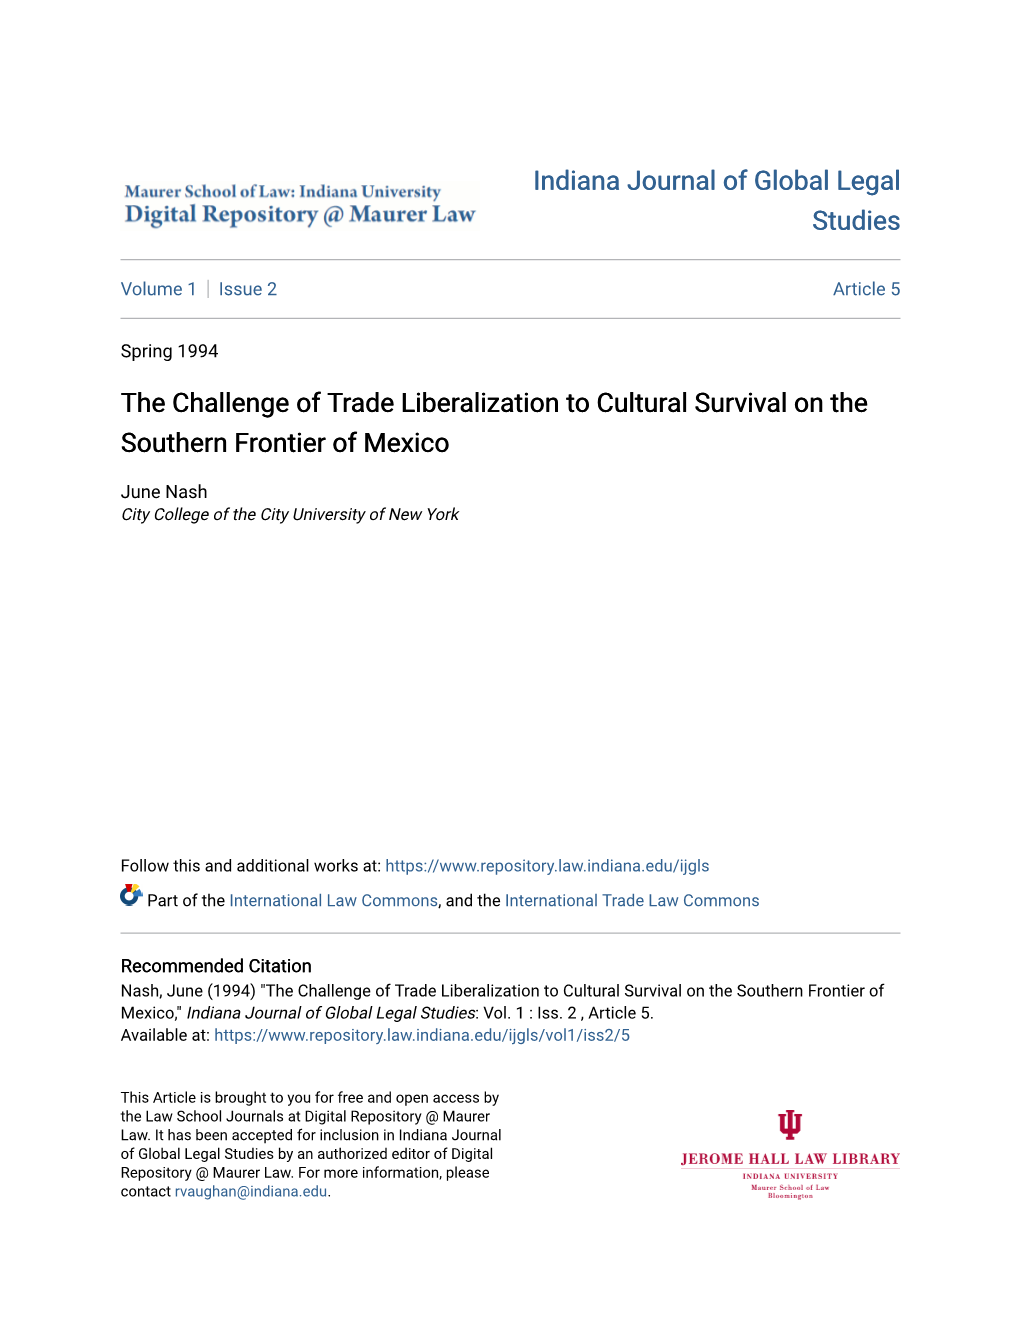 The Challenge of Trade Liberalization to Cultural Survival on the Southern Frontier of Mexico